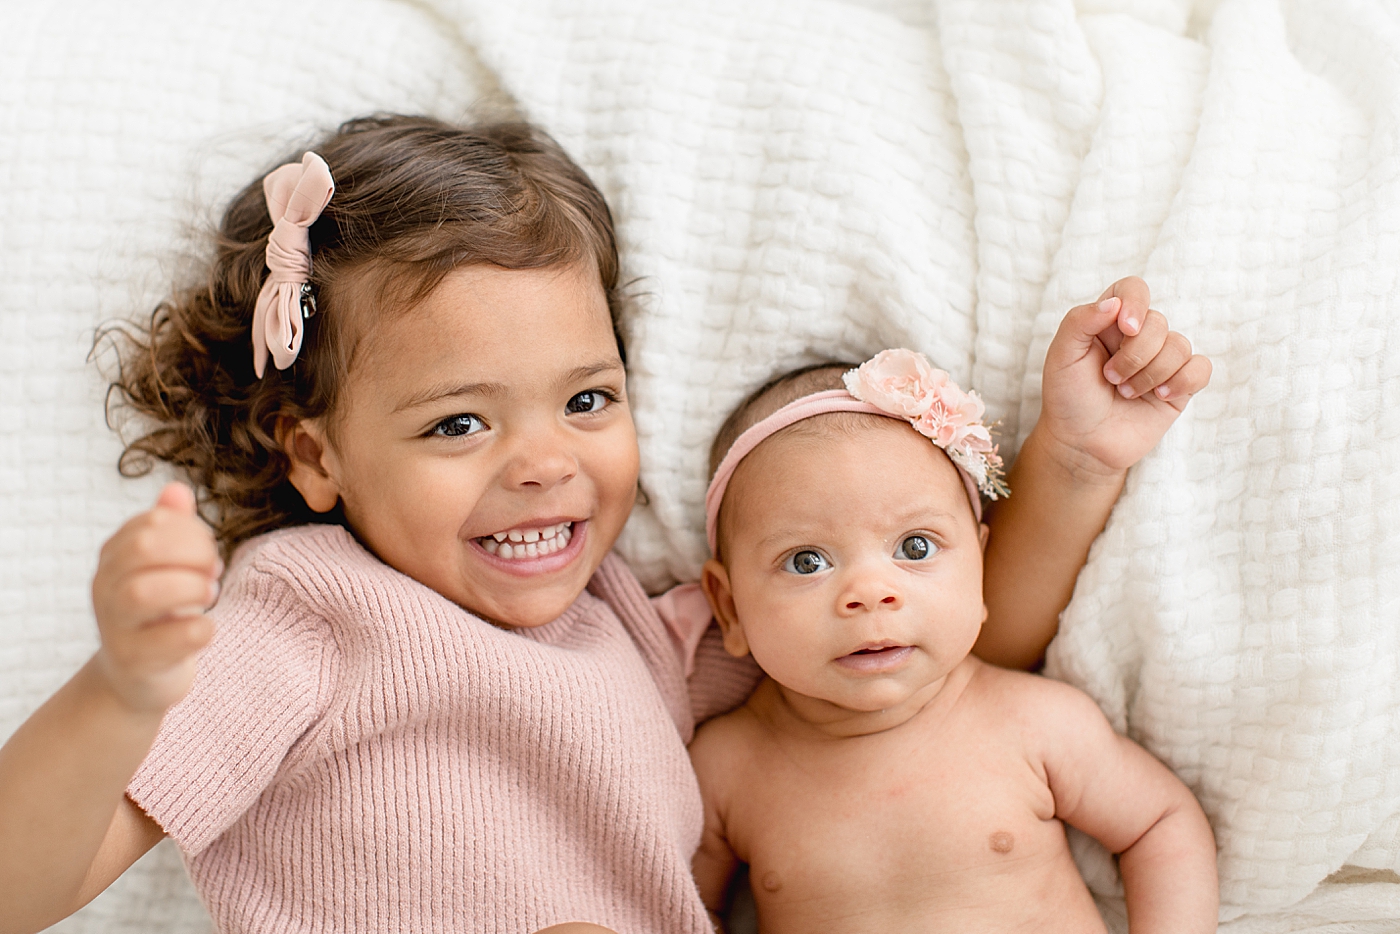 Sisters laying beside each other for baby sisters newborn photos. Photo by Brittany Elise Photography.